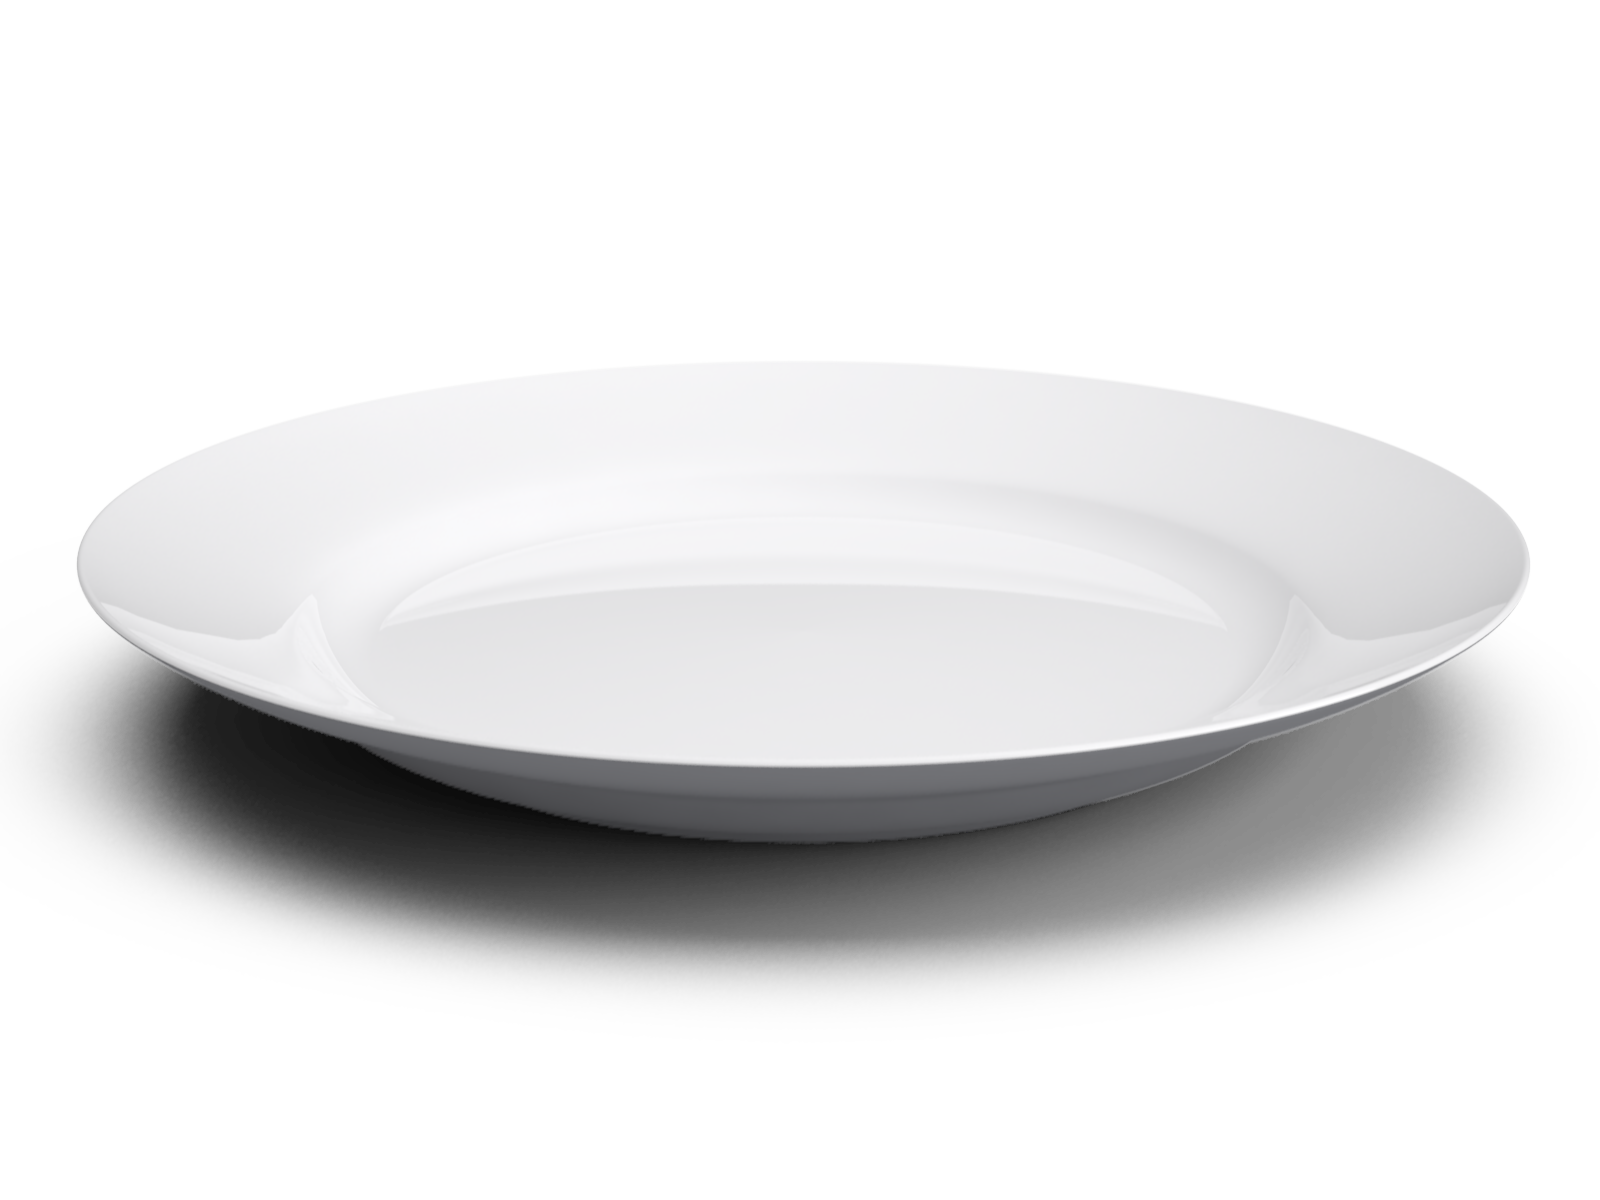 dishes clipart empty plate